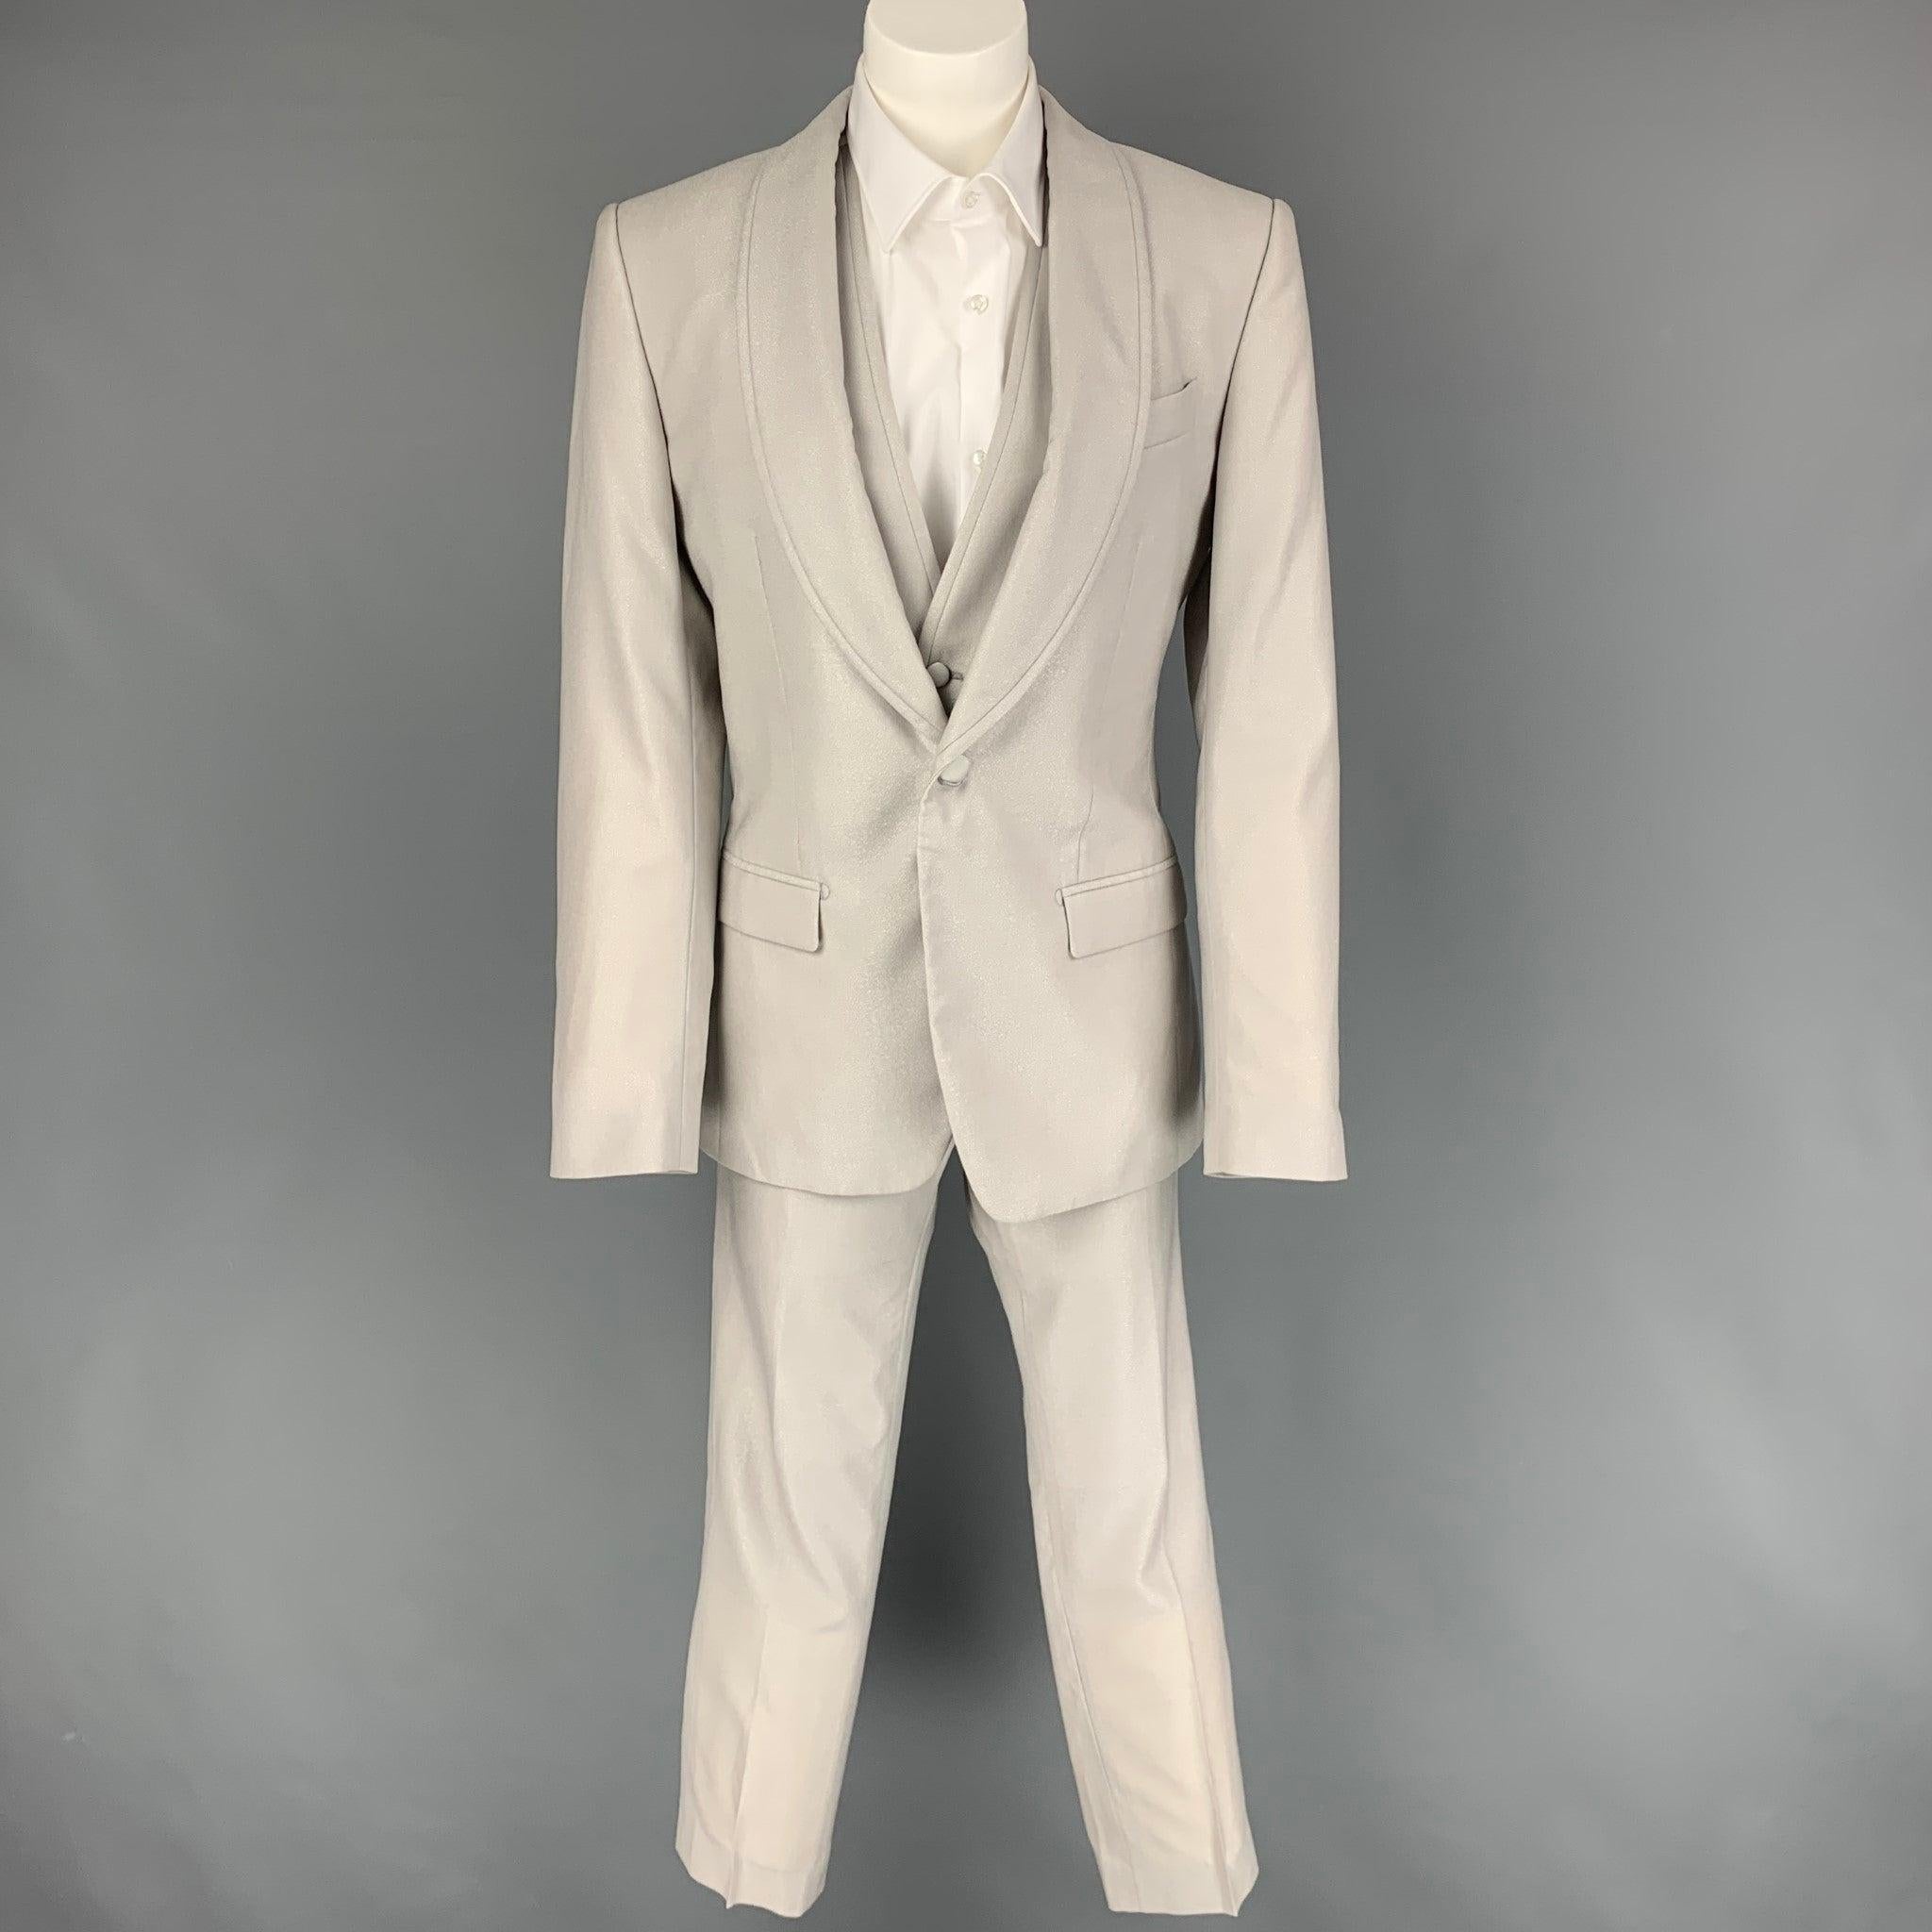 DOLCE & GABBANA 3 Piece
suit comes in a grey wool / silk with a full liner and includes a single breasted,
 single button sport coat with a shawl collar and a matching vest and flat front trousers. Made in Italy. Very Good Pre-Owned Condition. Light